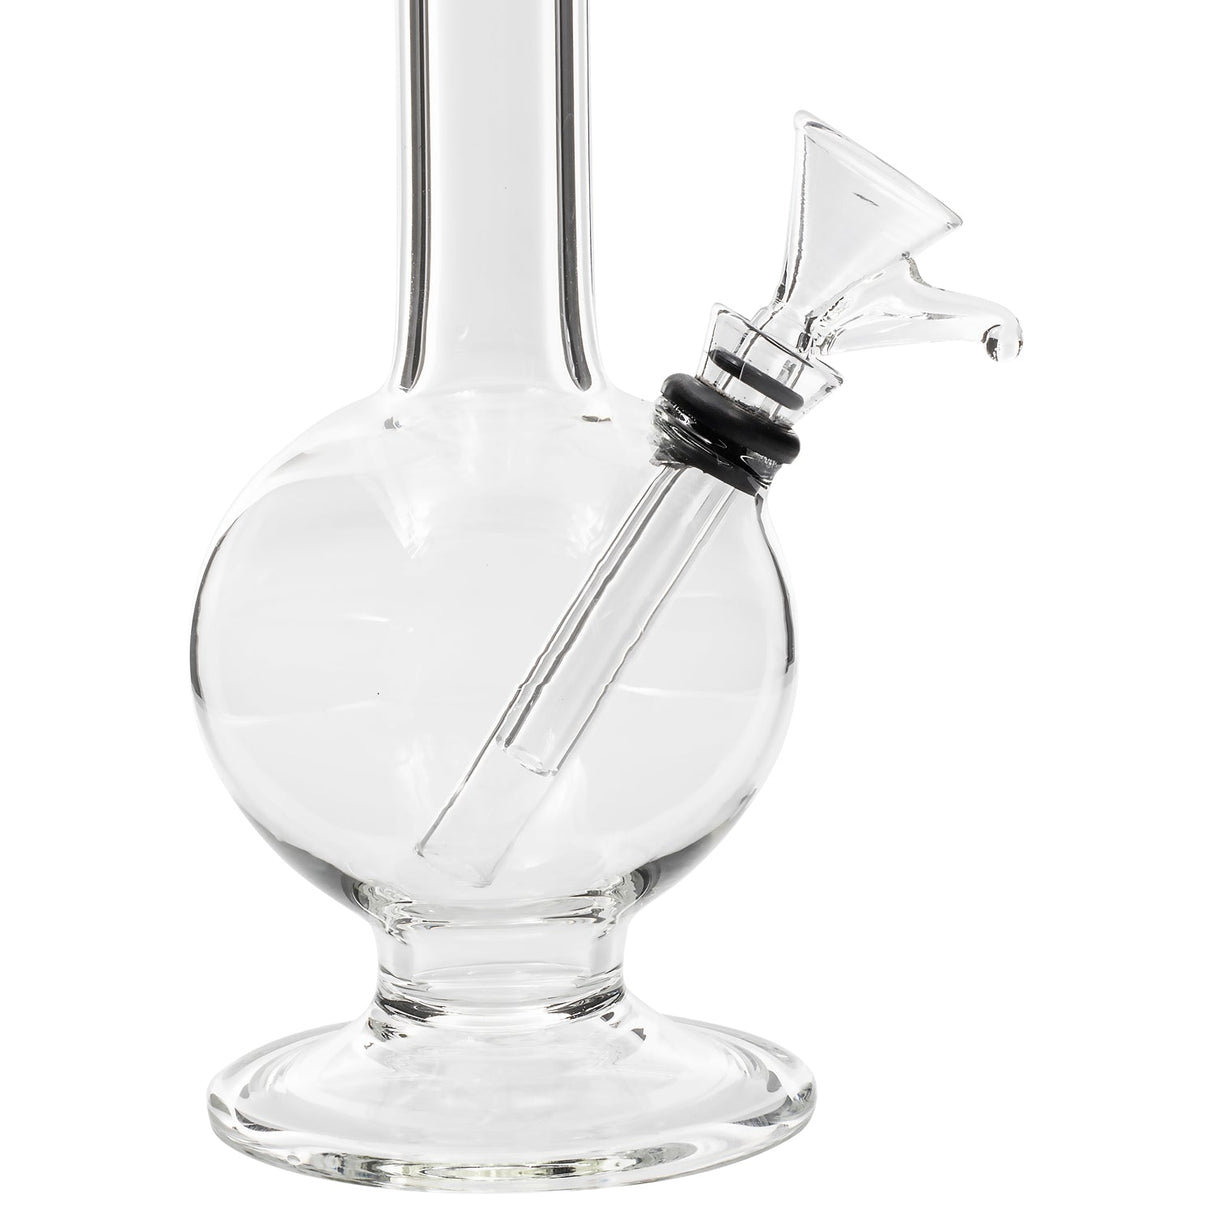 LA Pipes "The Icon" Glass Bubble Bong with Grommet Joint, 12" Height, Side View